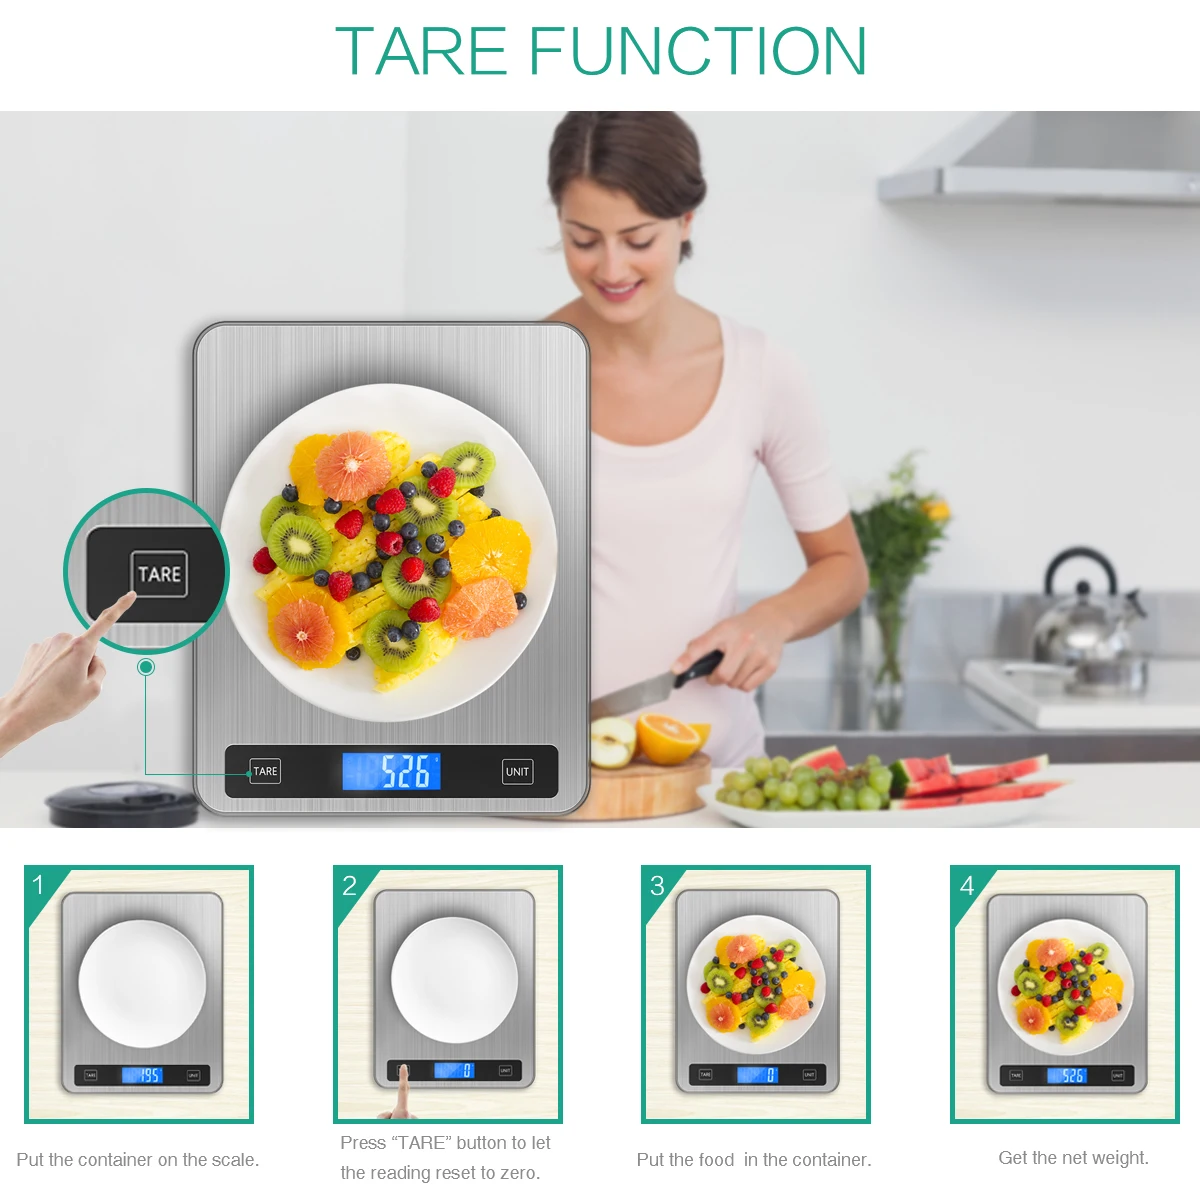 https://ae01.alicdn.com/kf/H6a6c540c281447a8949ae914e56c0aecx/20Kg-1g-Digital-Kitchen-Scale-USB-Powered-Balance-Multifunction-Food-Scale-for-Baking-Cooking-Household-Weigh.jpg